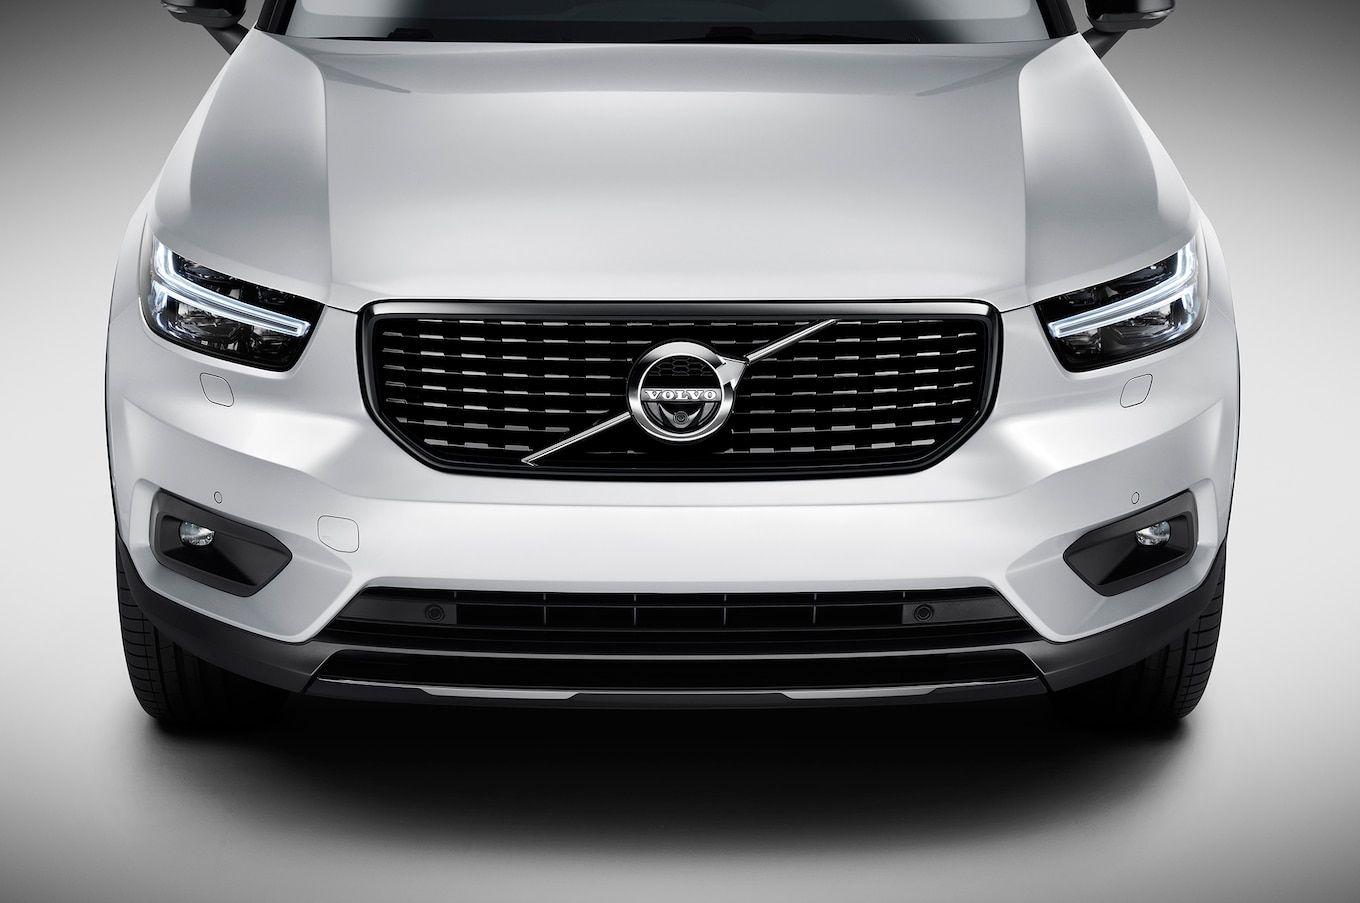 2018 Volvo Grill Logo - Volvo XC40 front grille